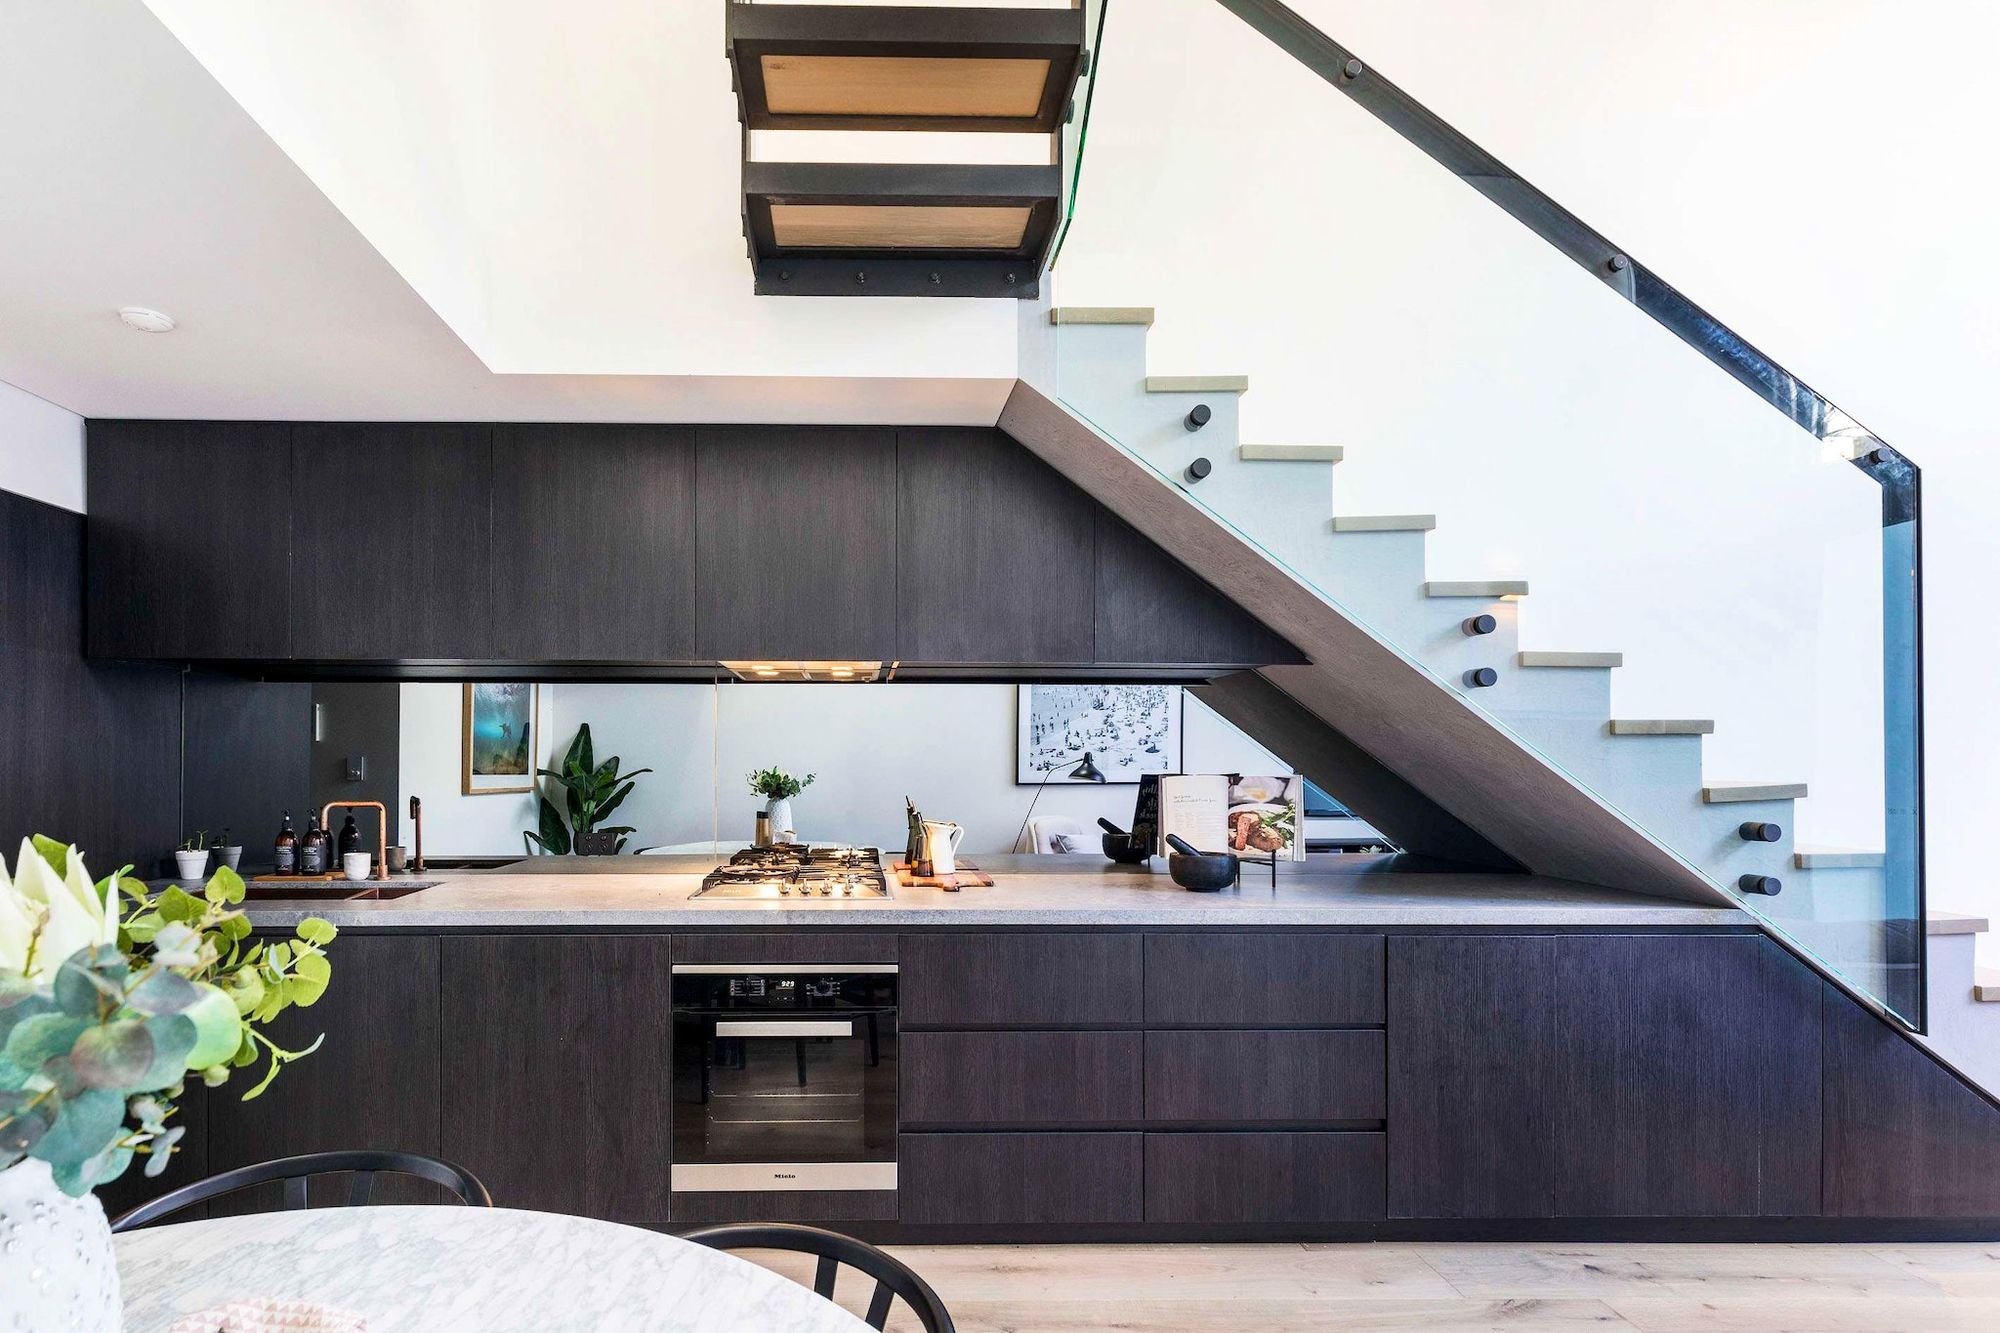 Darlinghurst Residence by JKMarchitects showing kitchen joinery located under feature stair